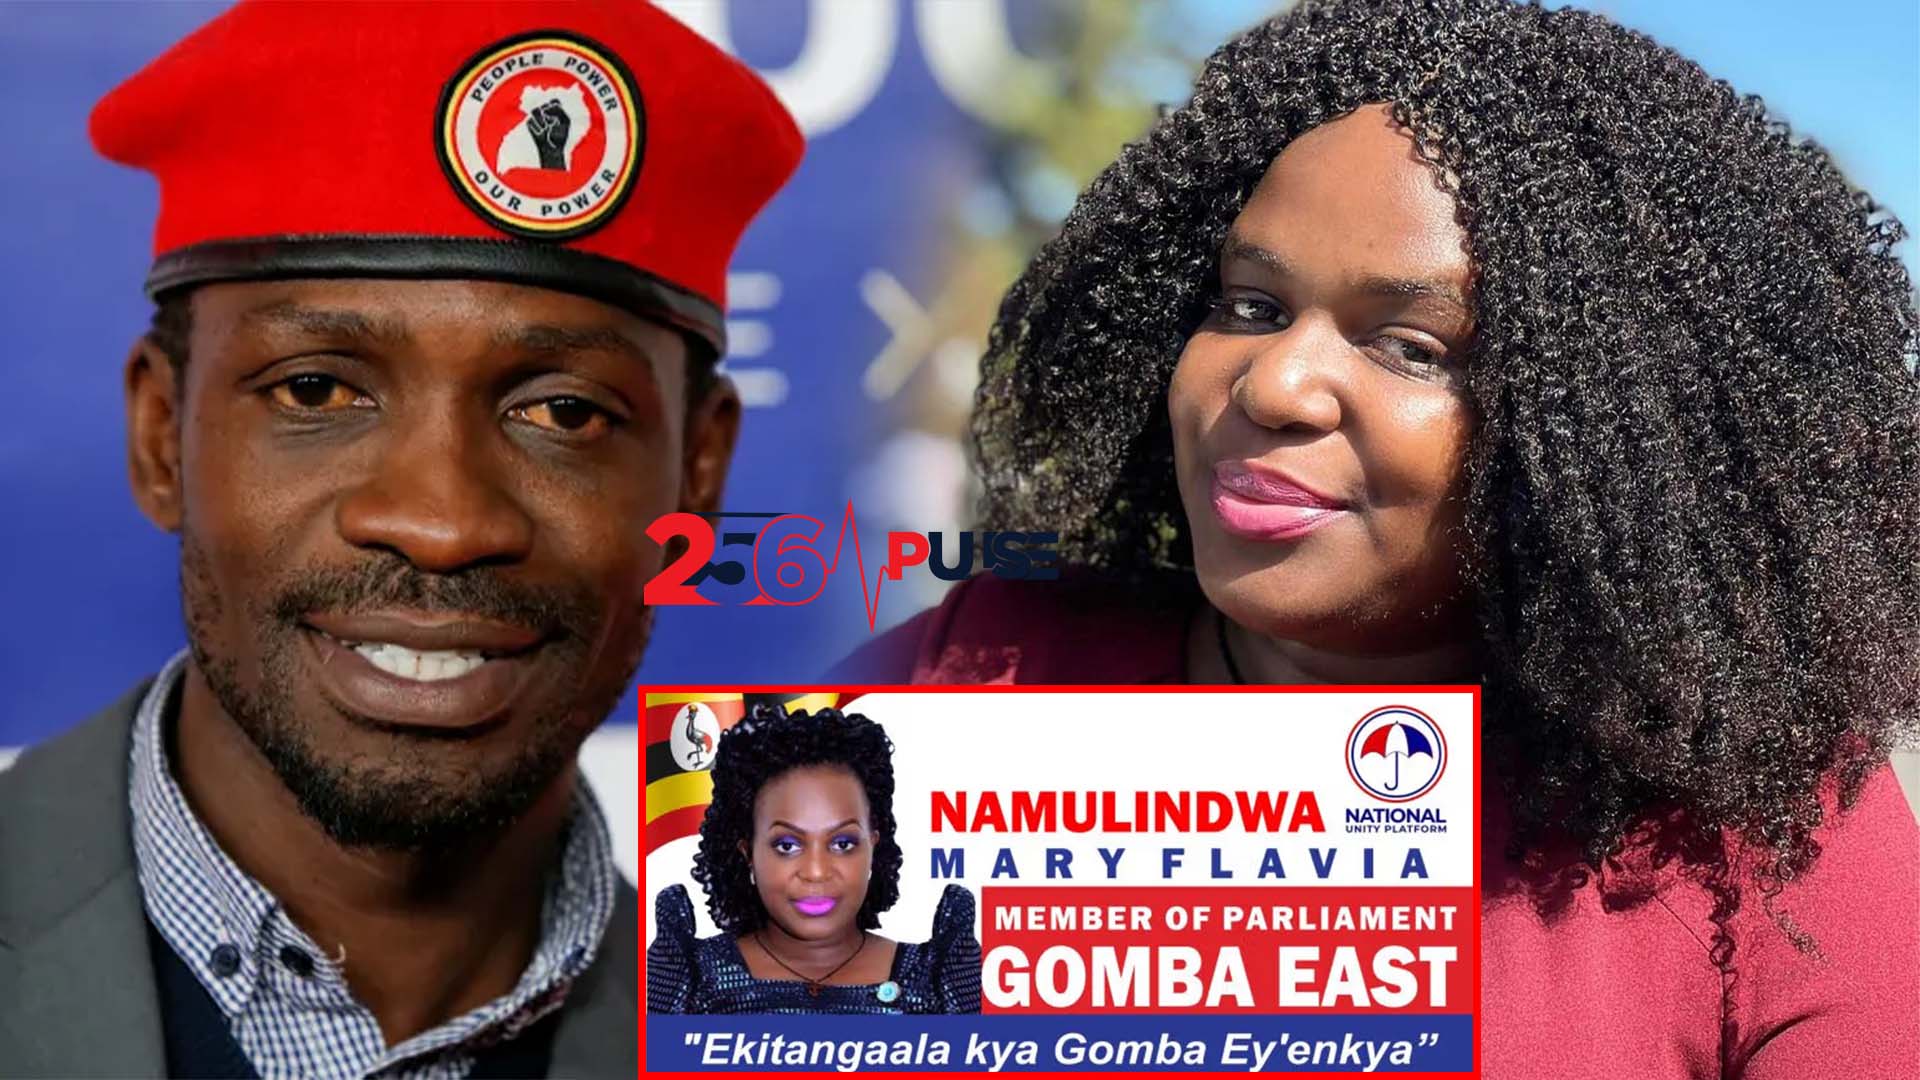 `Flavia Namulindwa to Contest for Parliamentary Seat for Gomba East